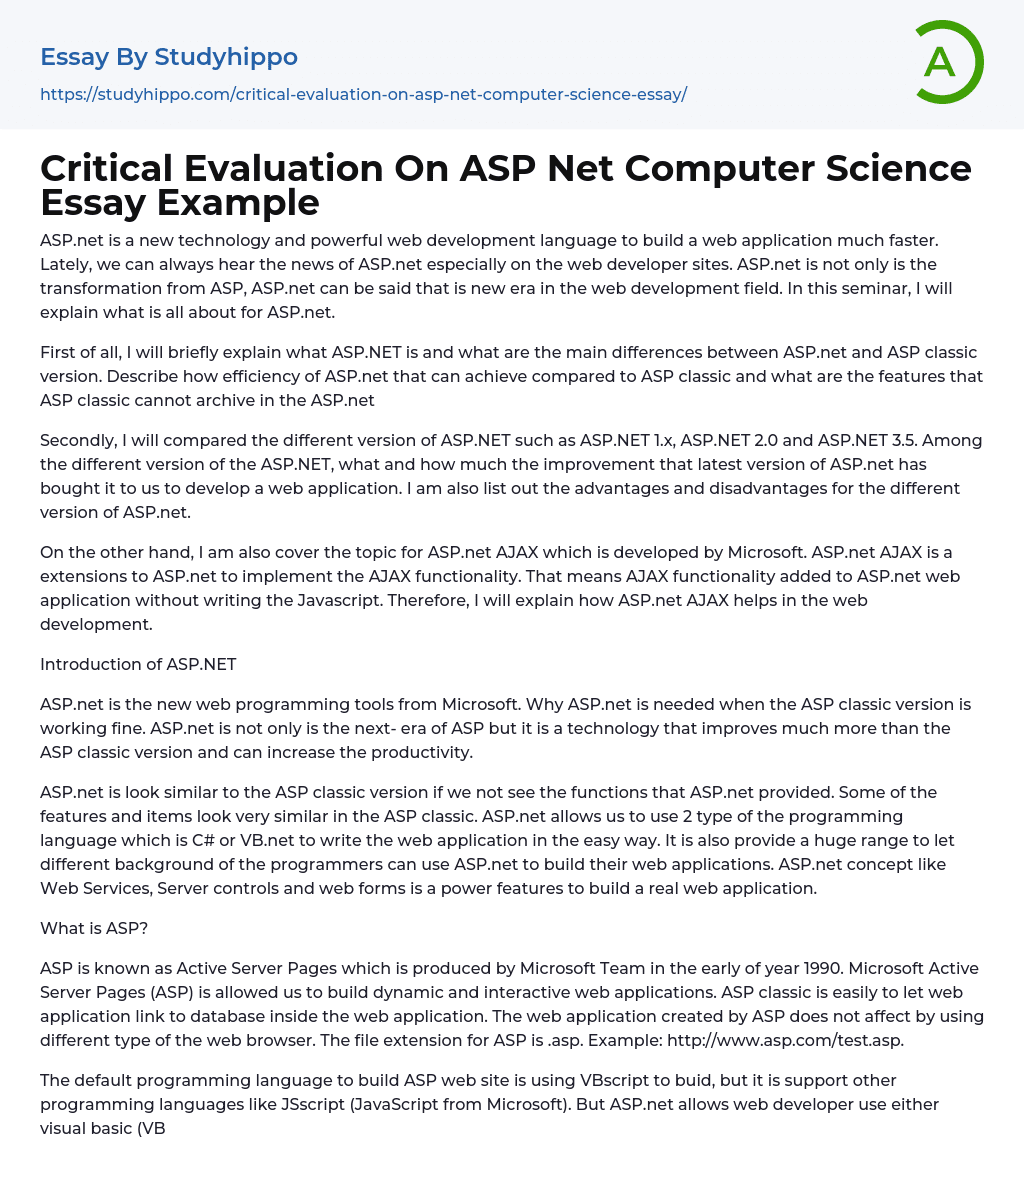 Critical Evaluation On ASP Net Computer Science Essay Example